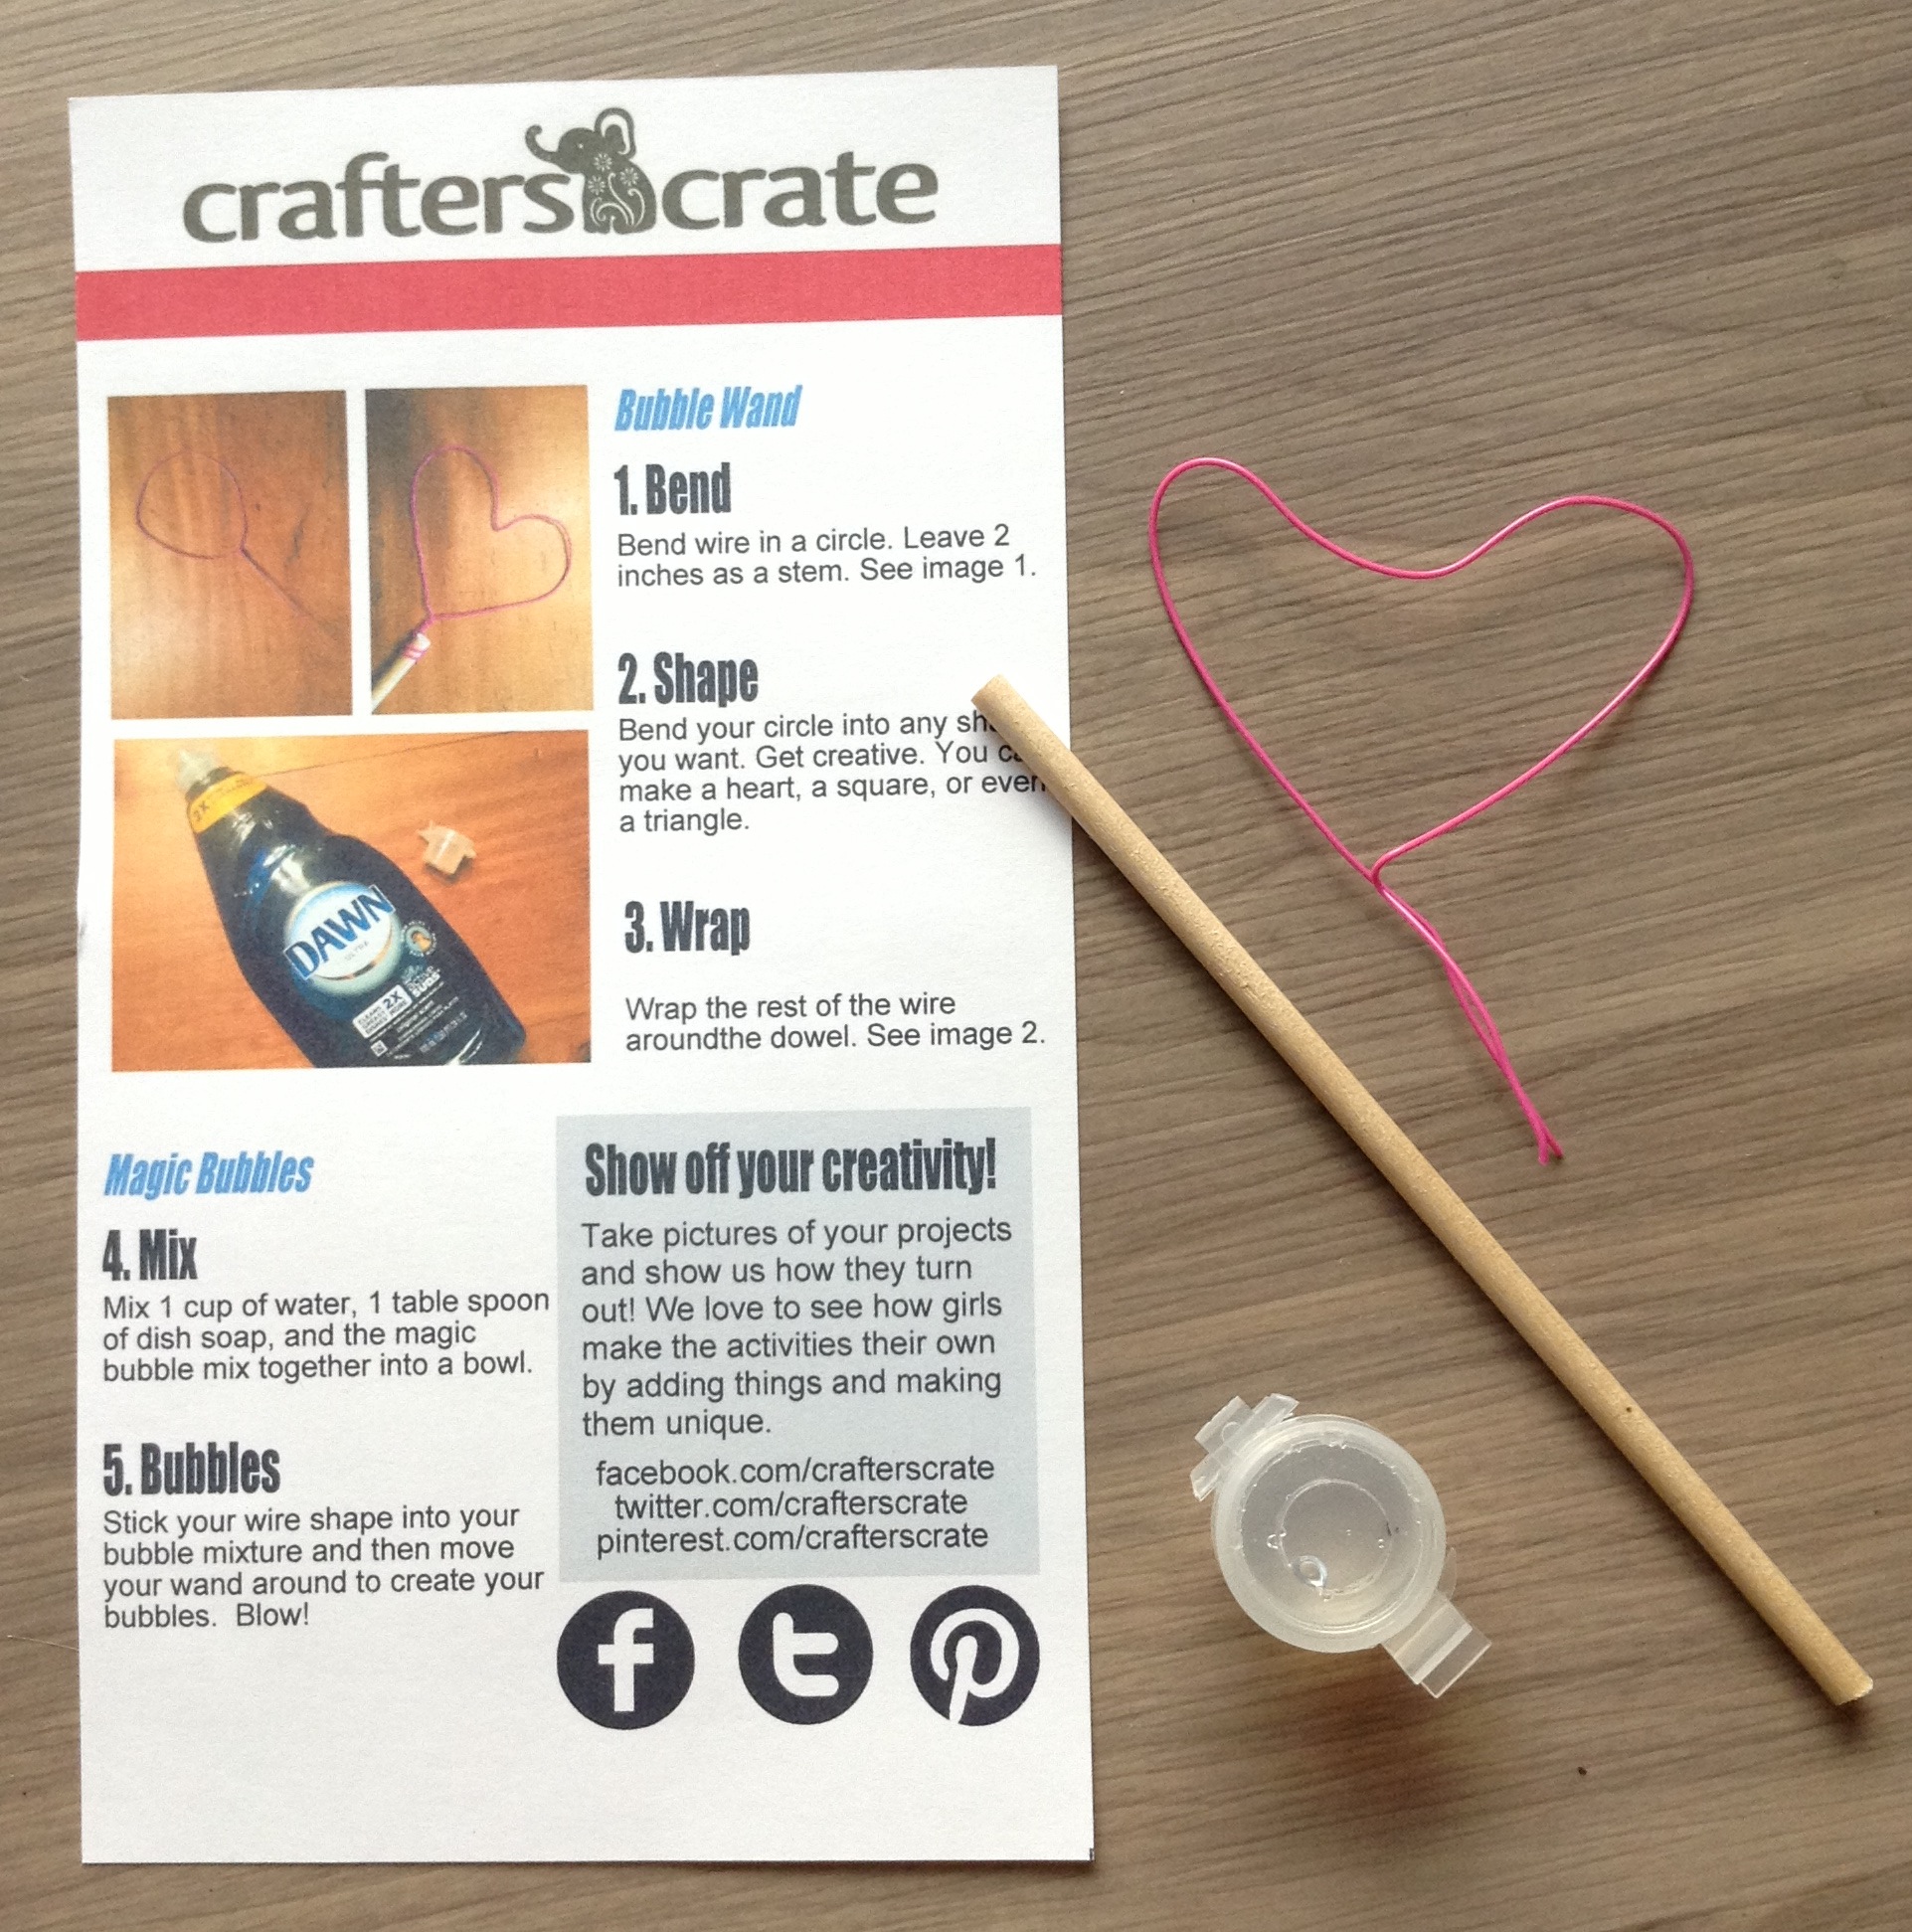 crafter's crate review + giveaway